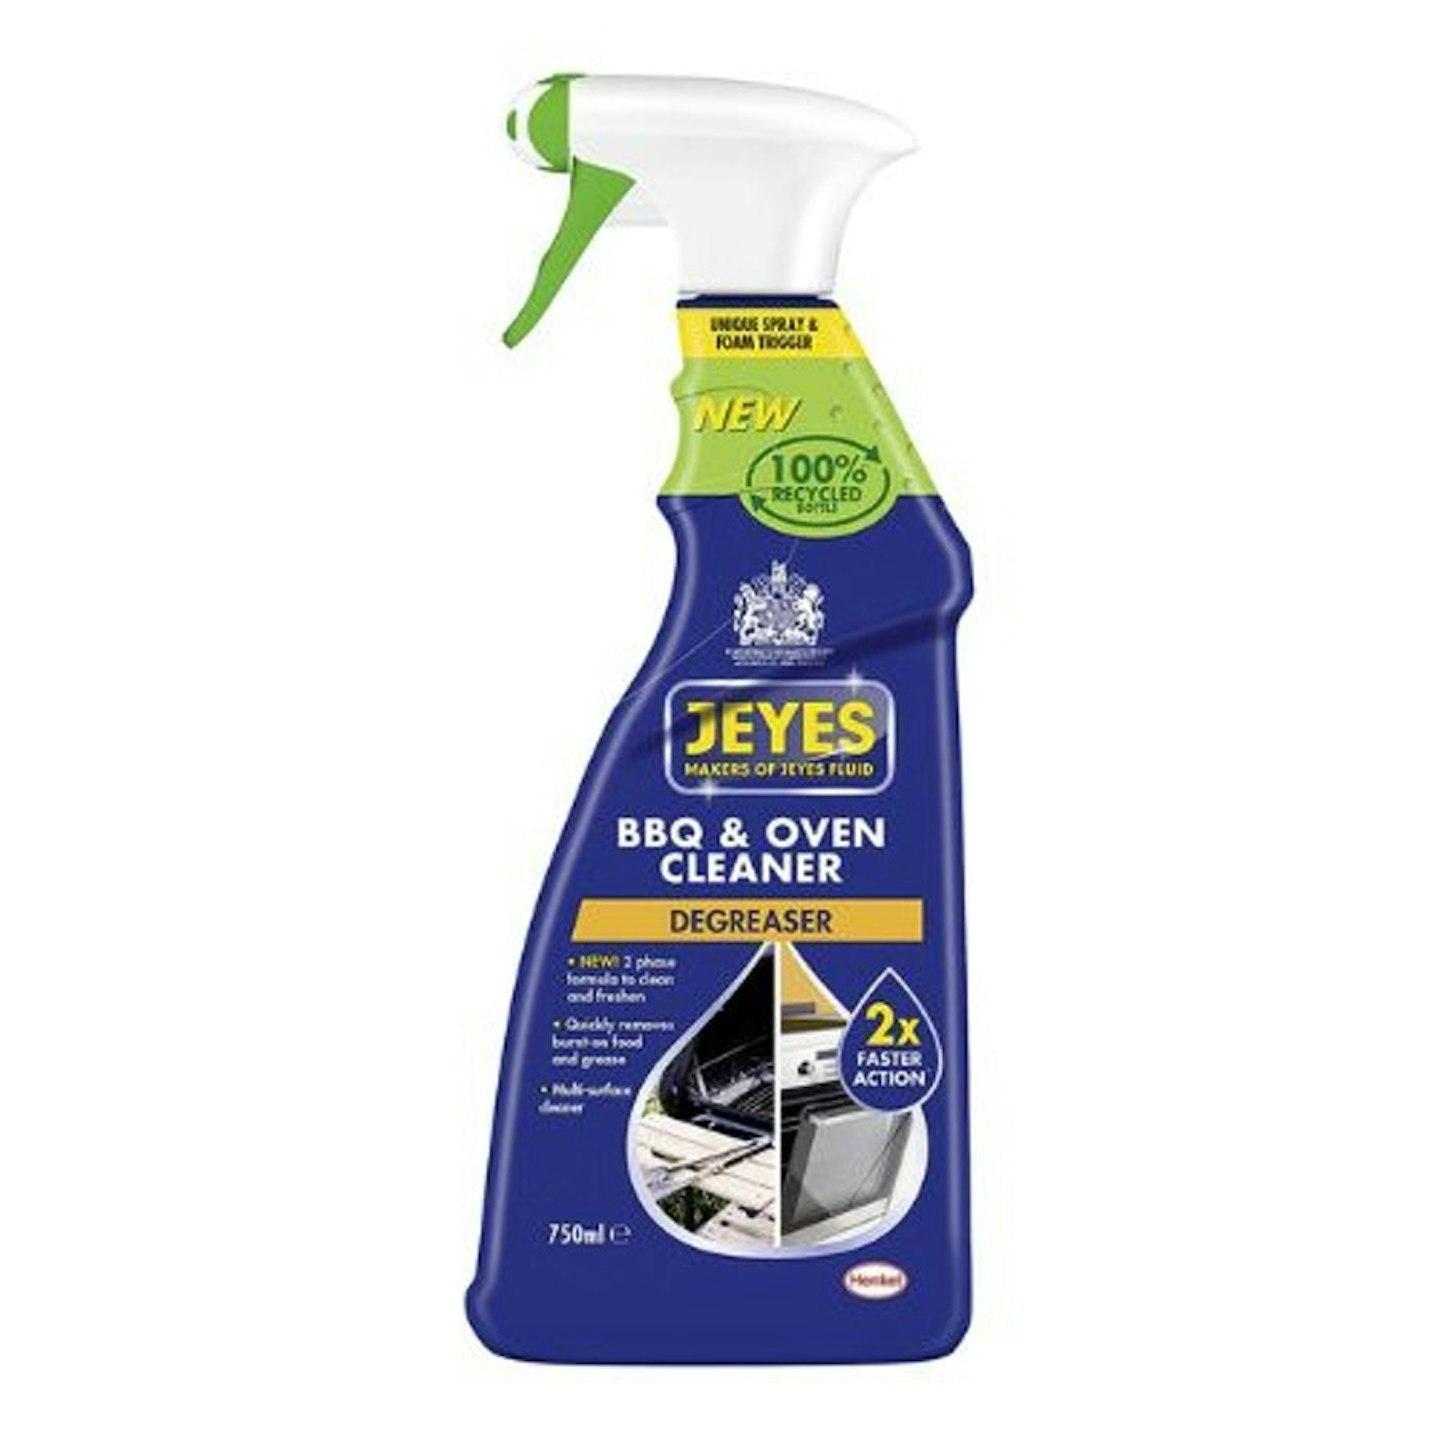 bbq-cleaner-jeyes